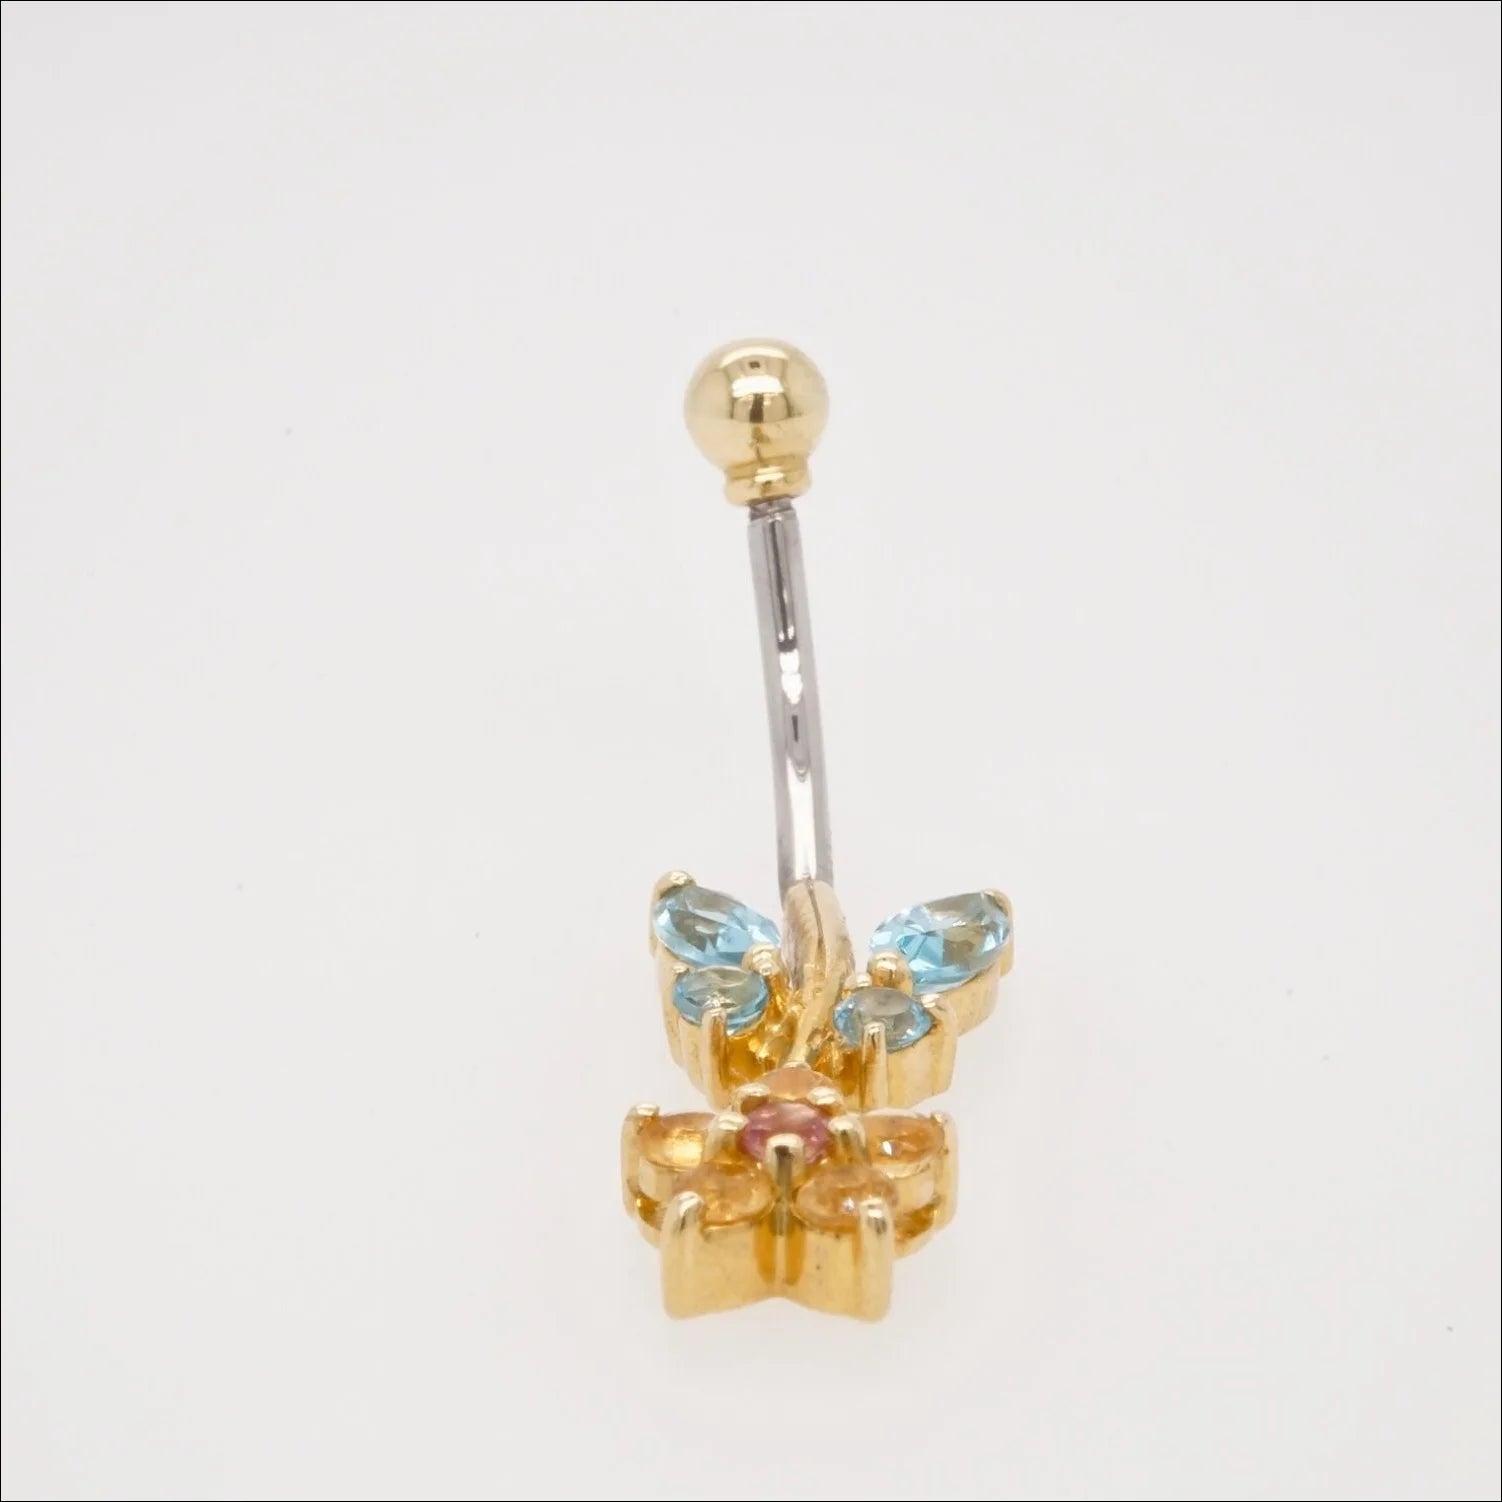 Luxury Topaz Bellybutton Piercing | Home page